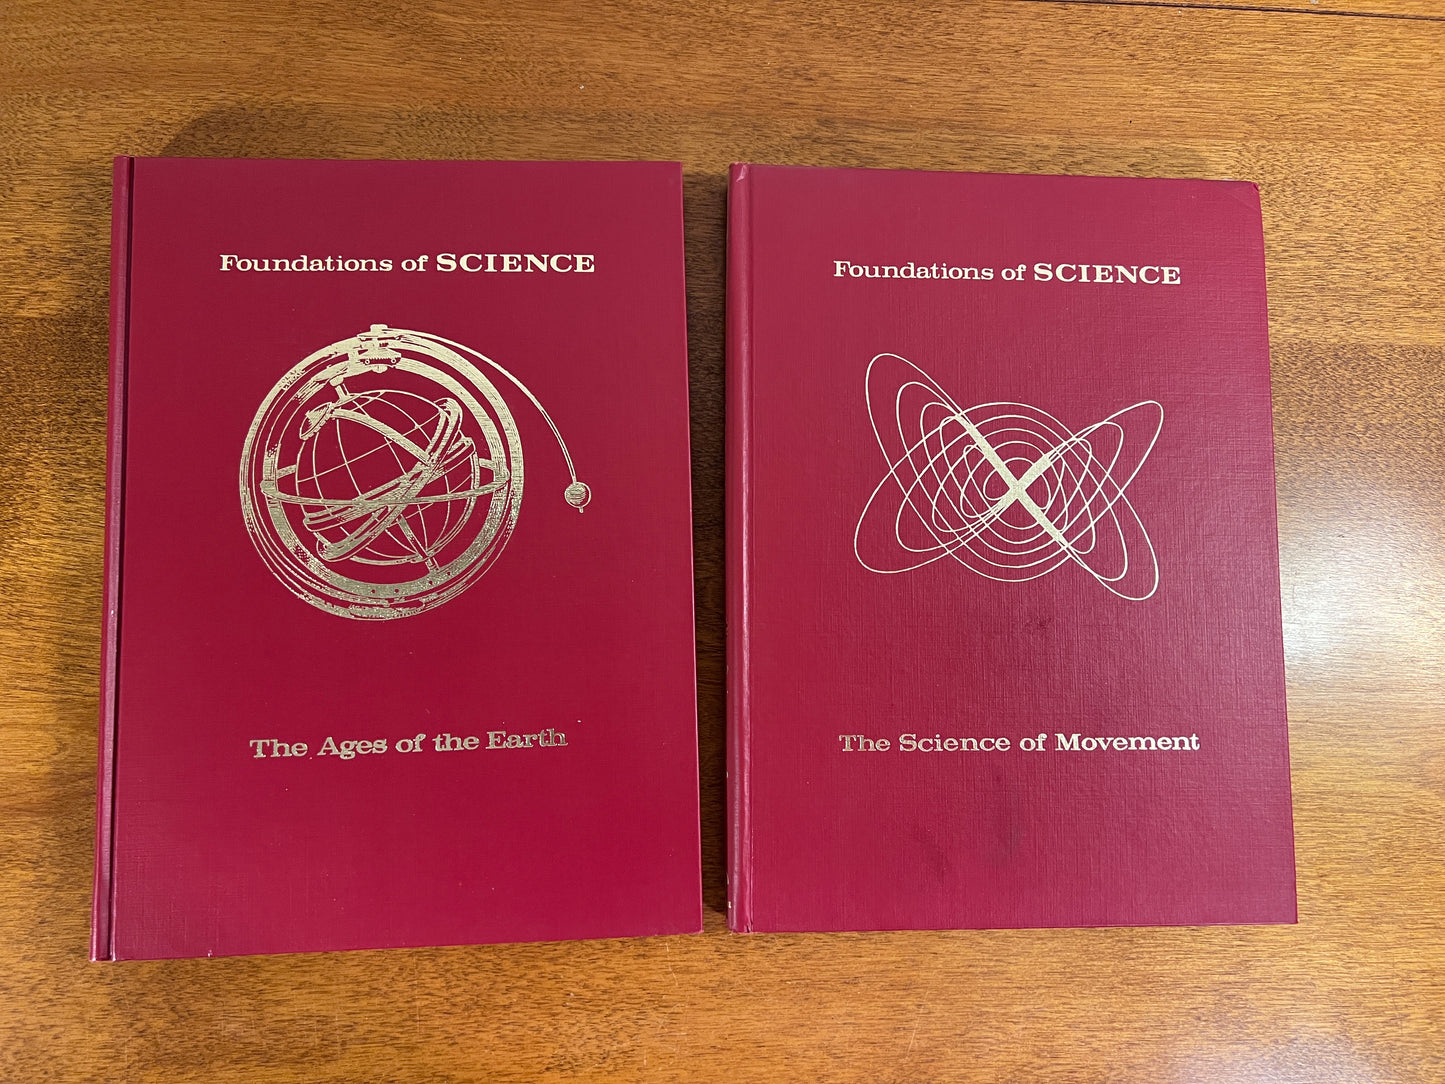 Foundations of Science by Greystone Press [5 Book Set]